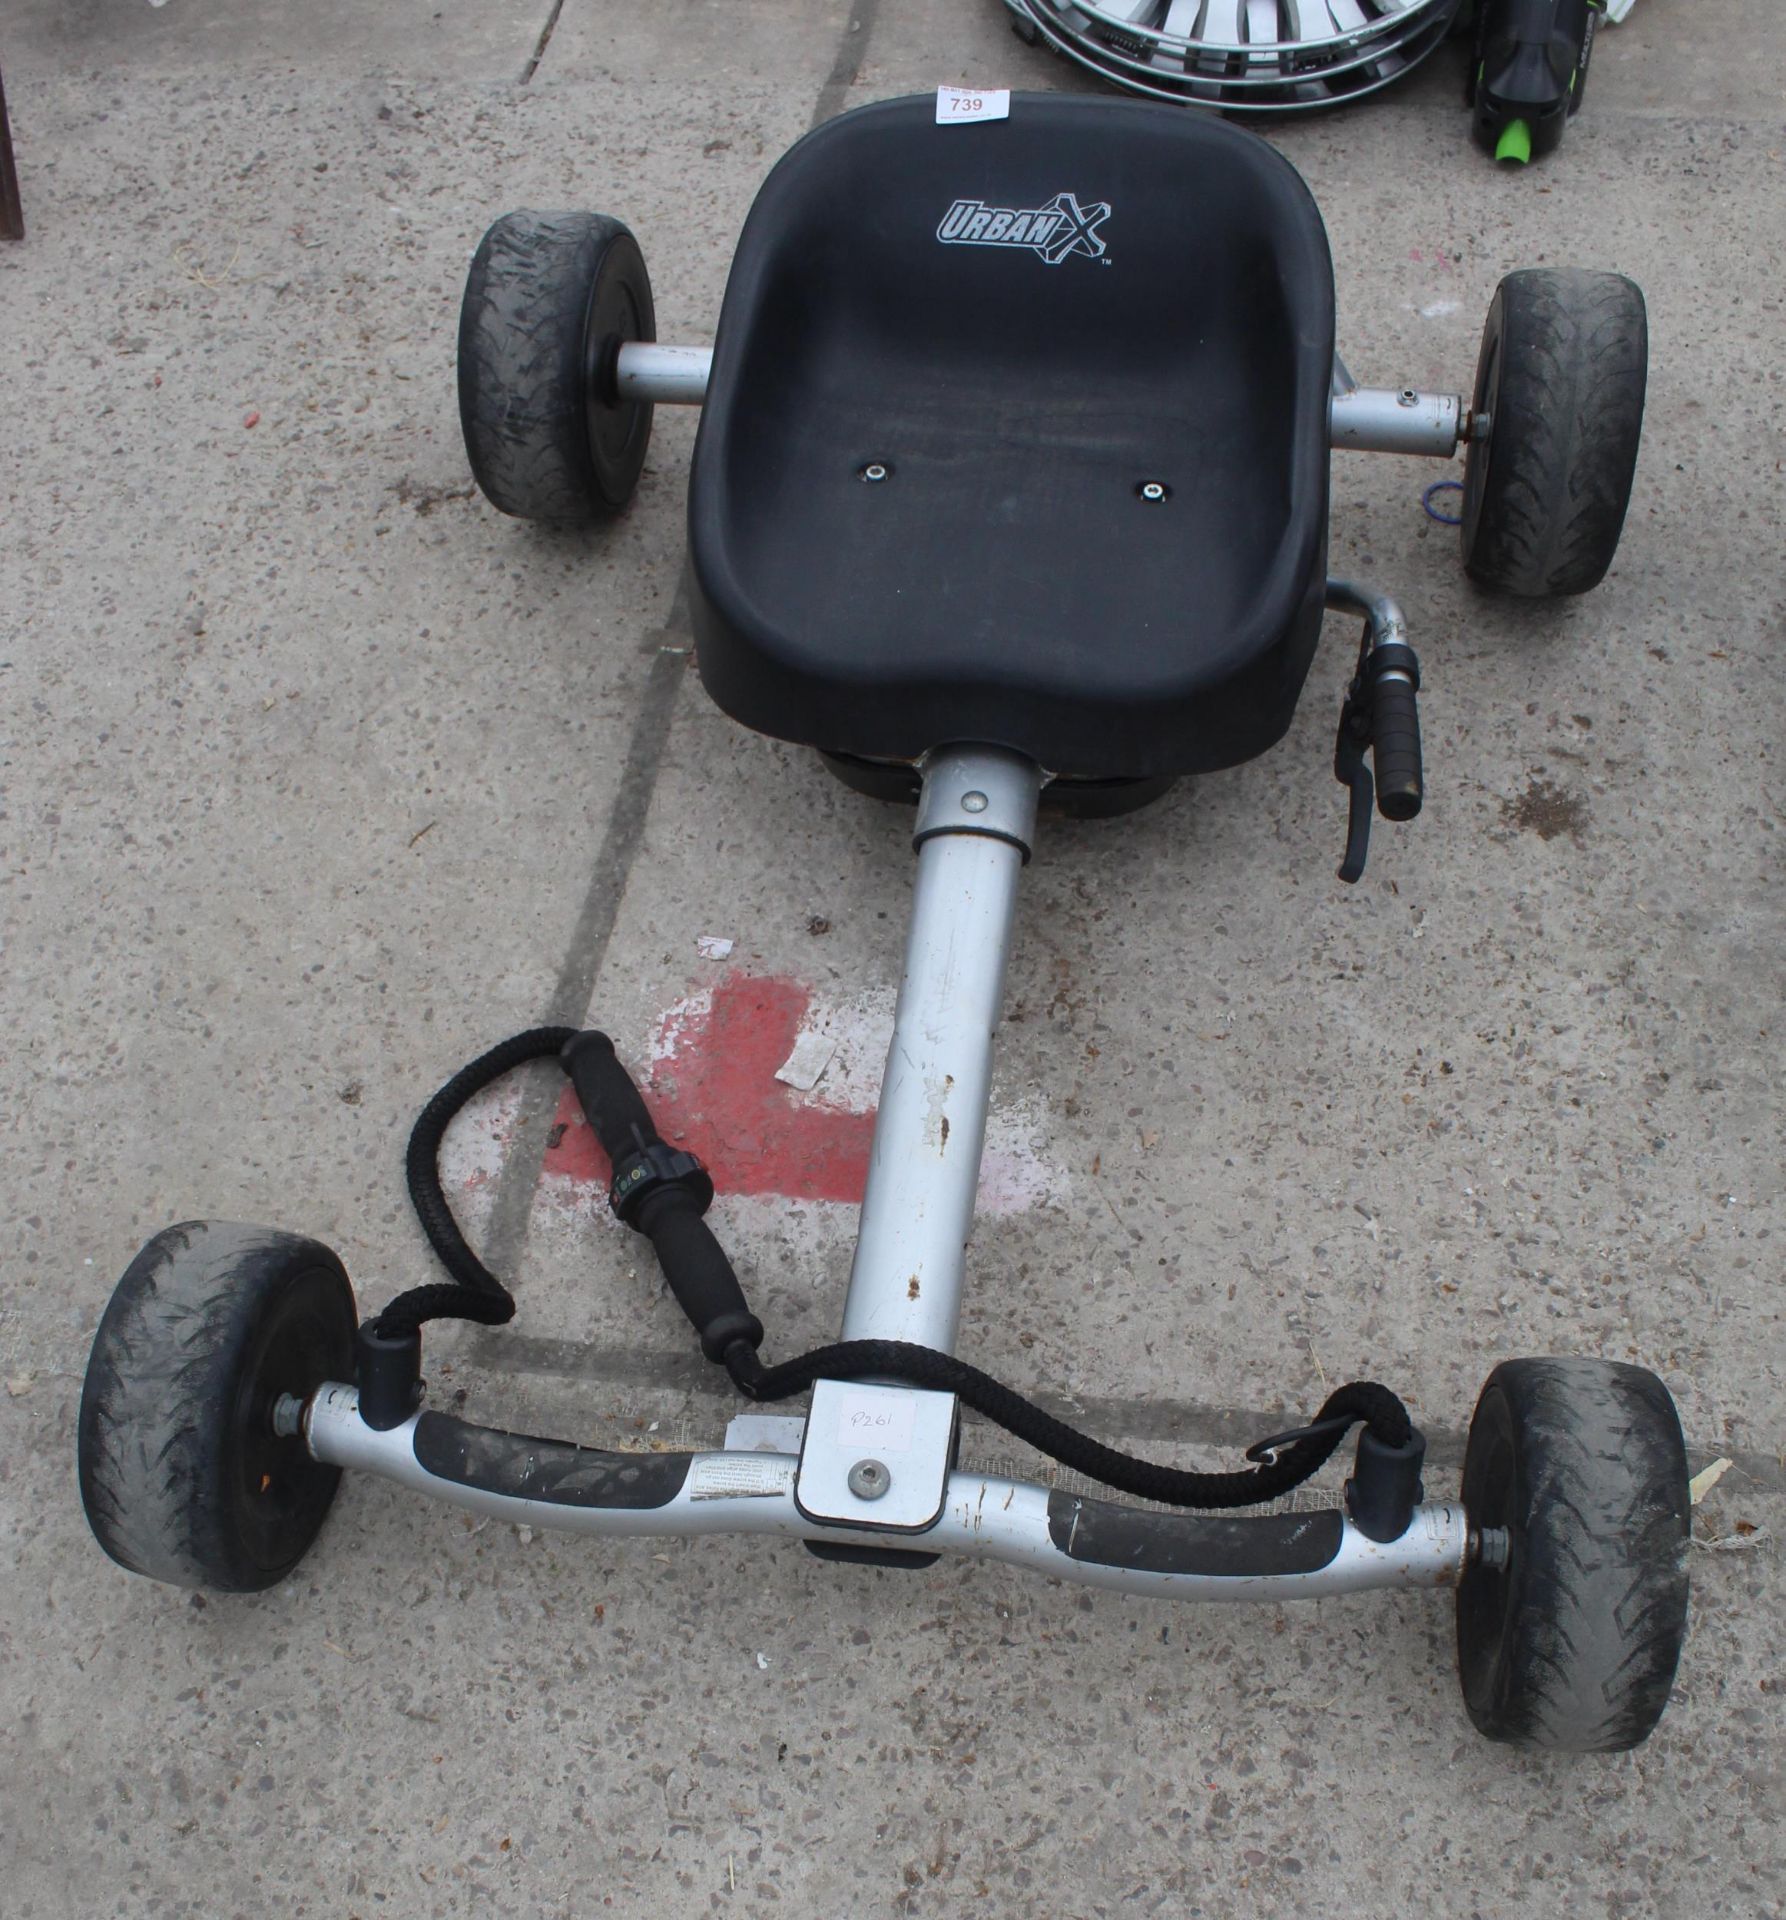 URBAN X BUGGY NEW BATTERY AND CHARGER IN WORKING ORDER NO VAT